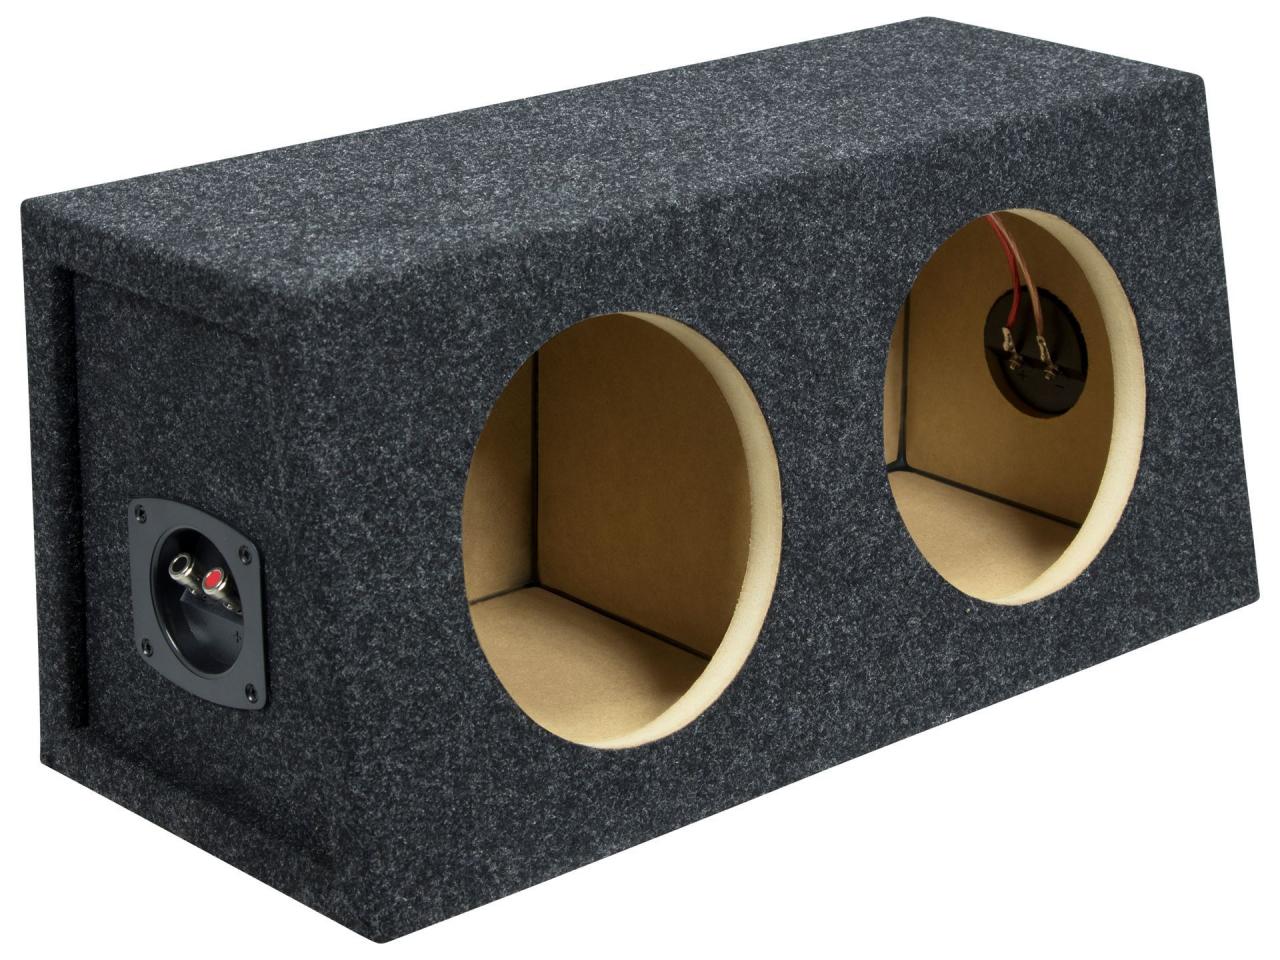 Buy Atrend BBox E12D Dual 12 Sealed Carpeted Subwoofer Enclosure Online in  Germany. B0013MV7CY